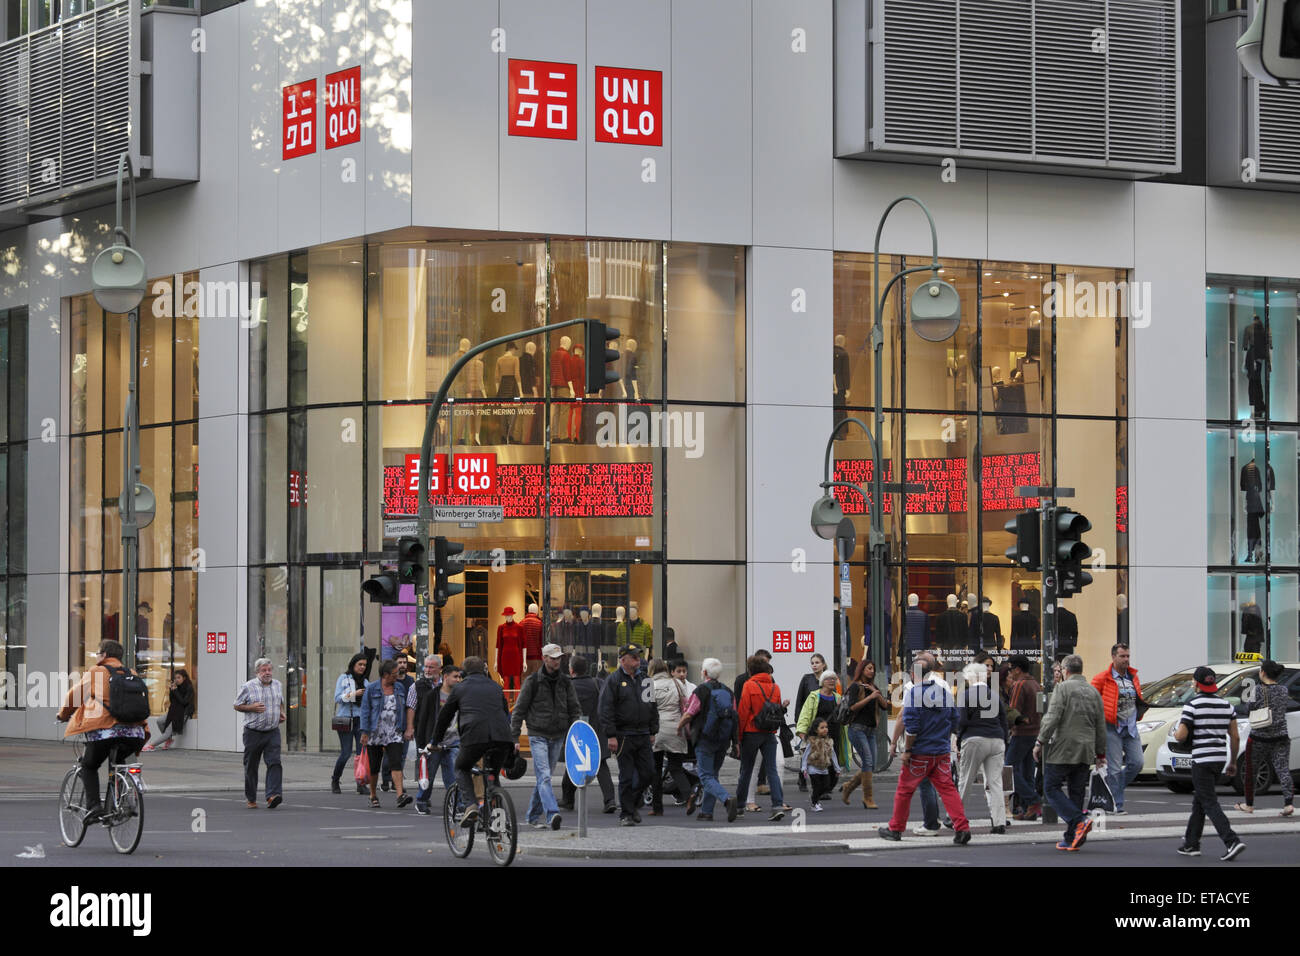 Berlin, Germany, Uniqlo clothing store on Tauentzien Stock Photo - Alamy